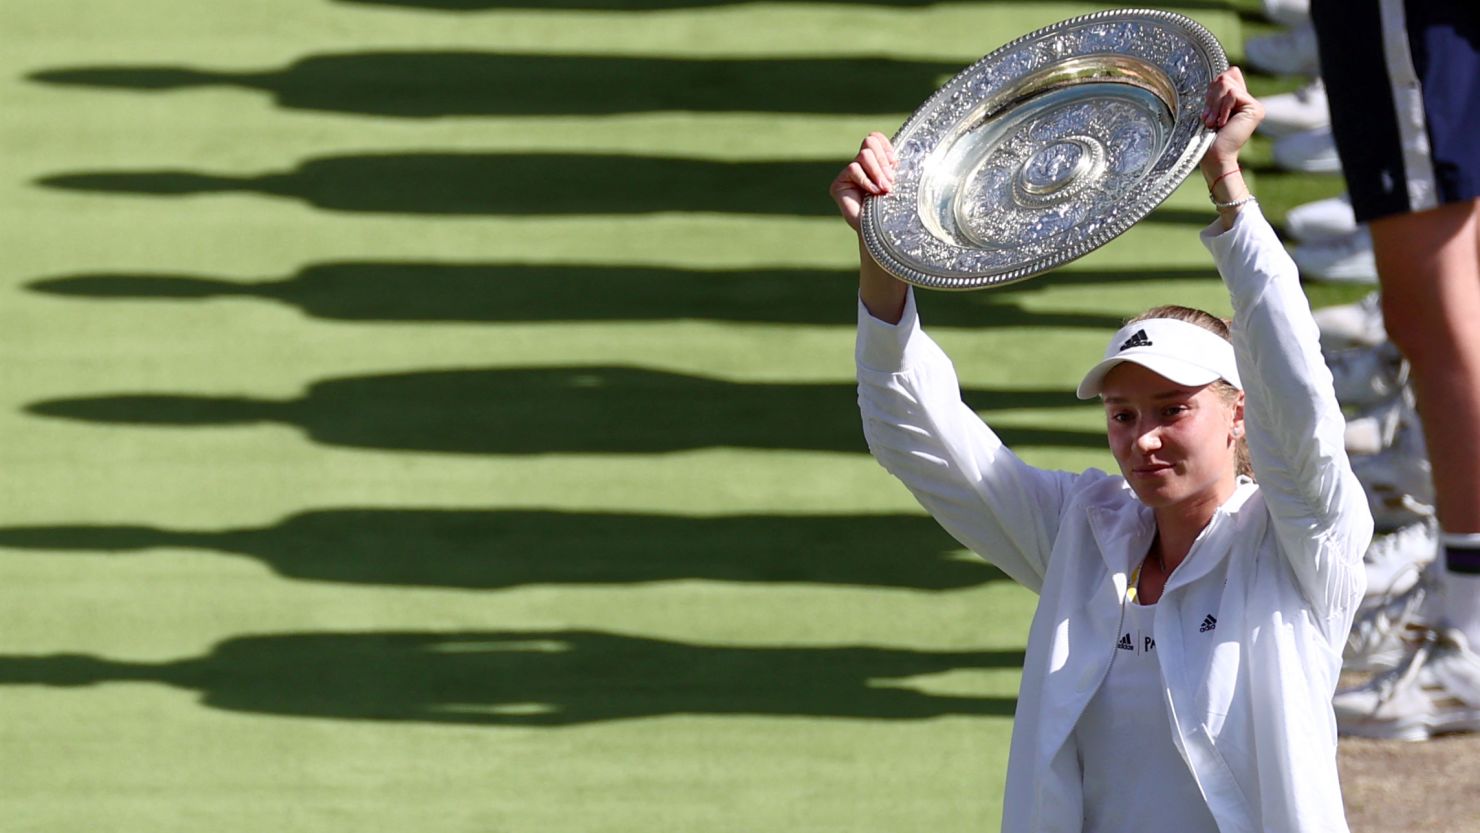 Rybakina Becomes First Kazakh Player To Win Grand Slam Title With Wimbledon  Victory